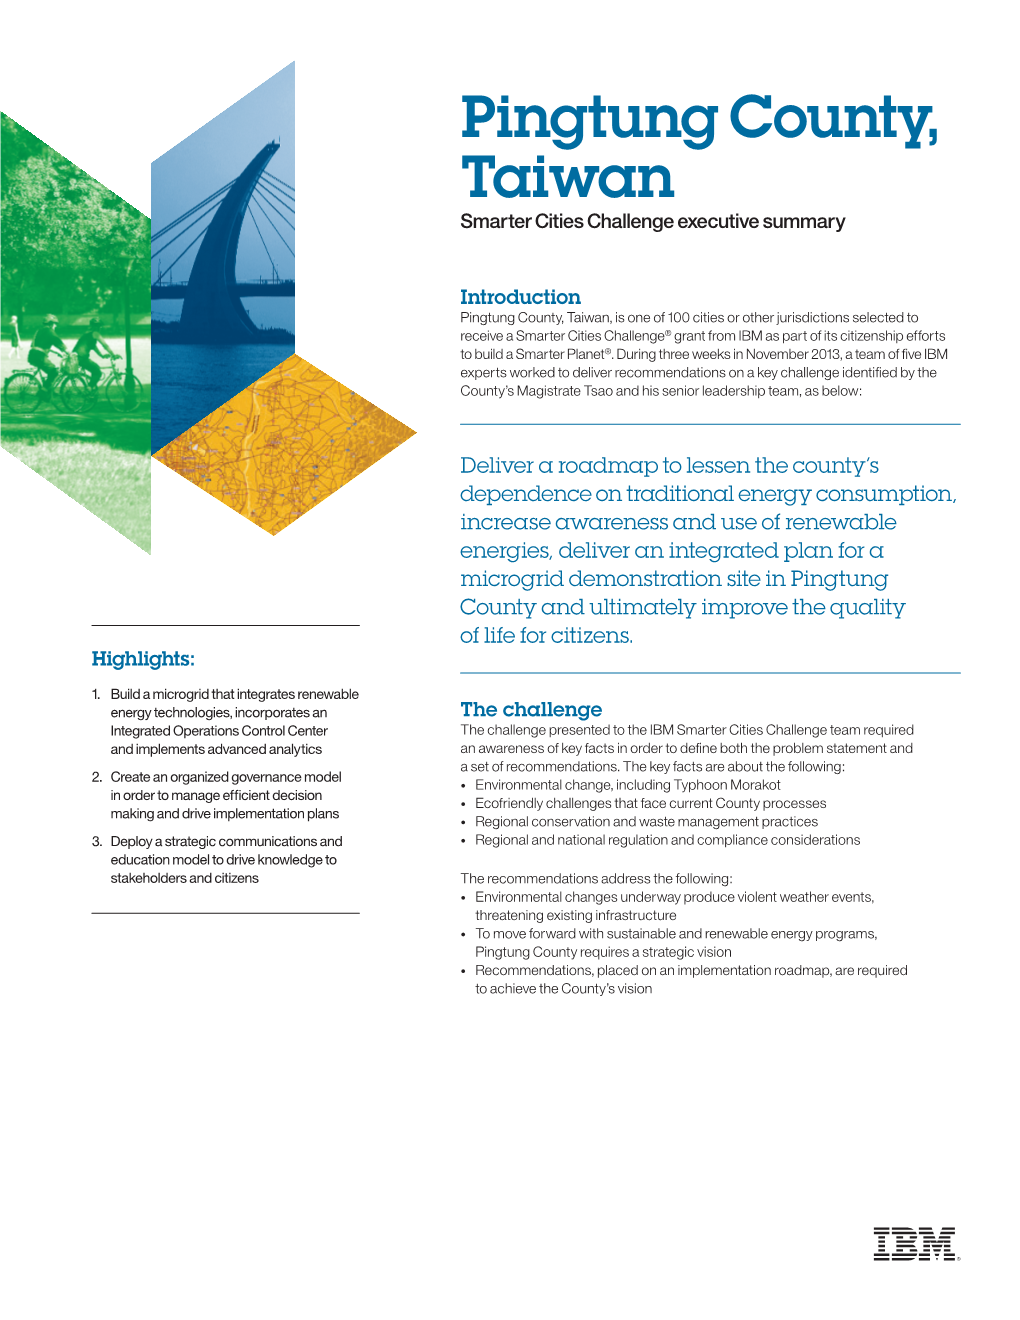 Pingtung County, Taiwan Smarter Cities Challenge Executive Summary